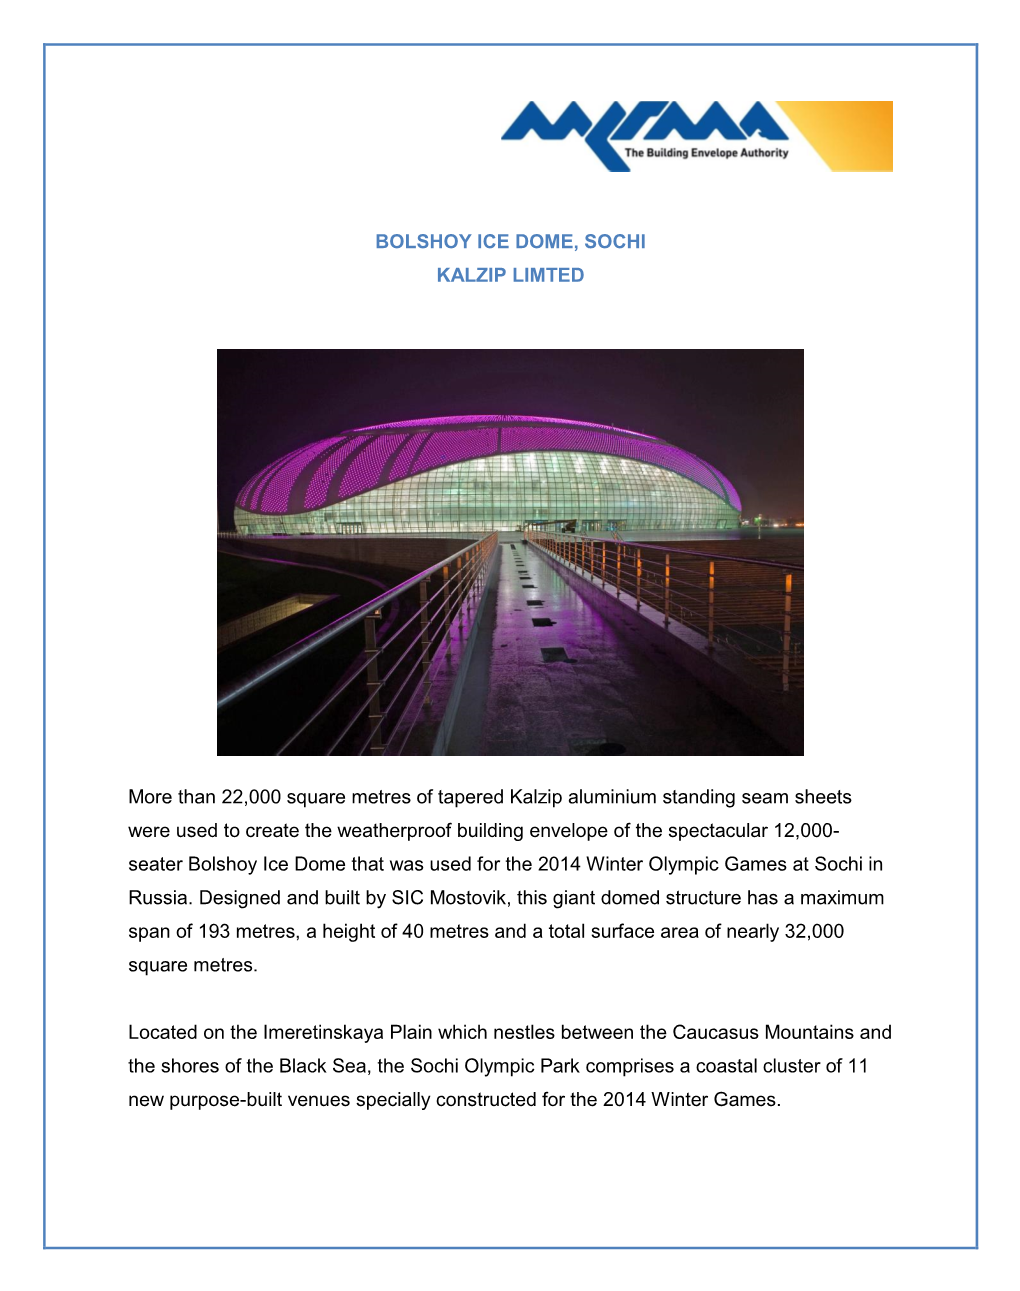 BOLSHOY ICE DOME, SOCHI KALZIP LIMTED More Than 22,000 Square Metres of Tapered Kalzip Aluminium Standing Seam Sheets Were Used